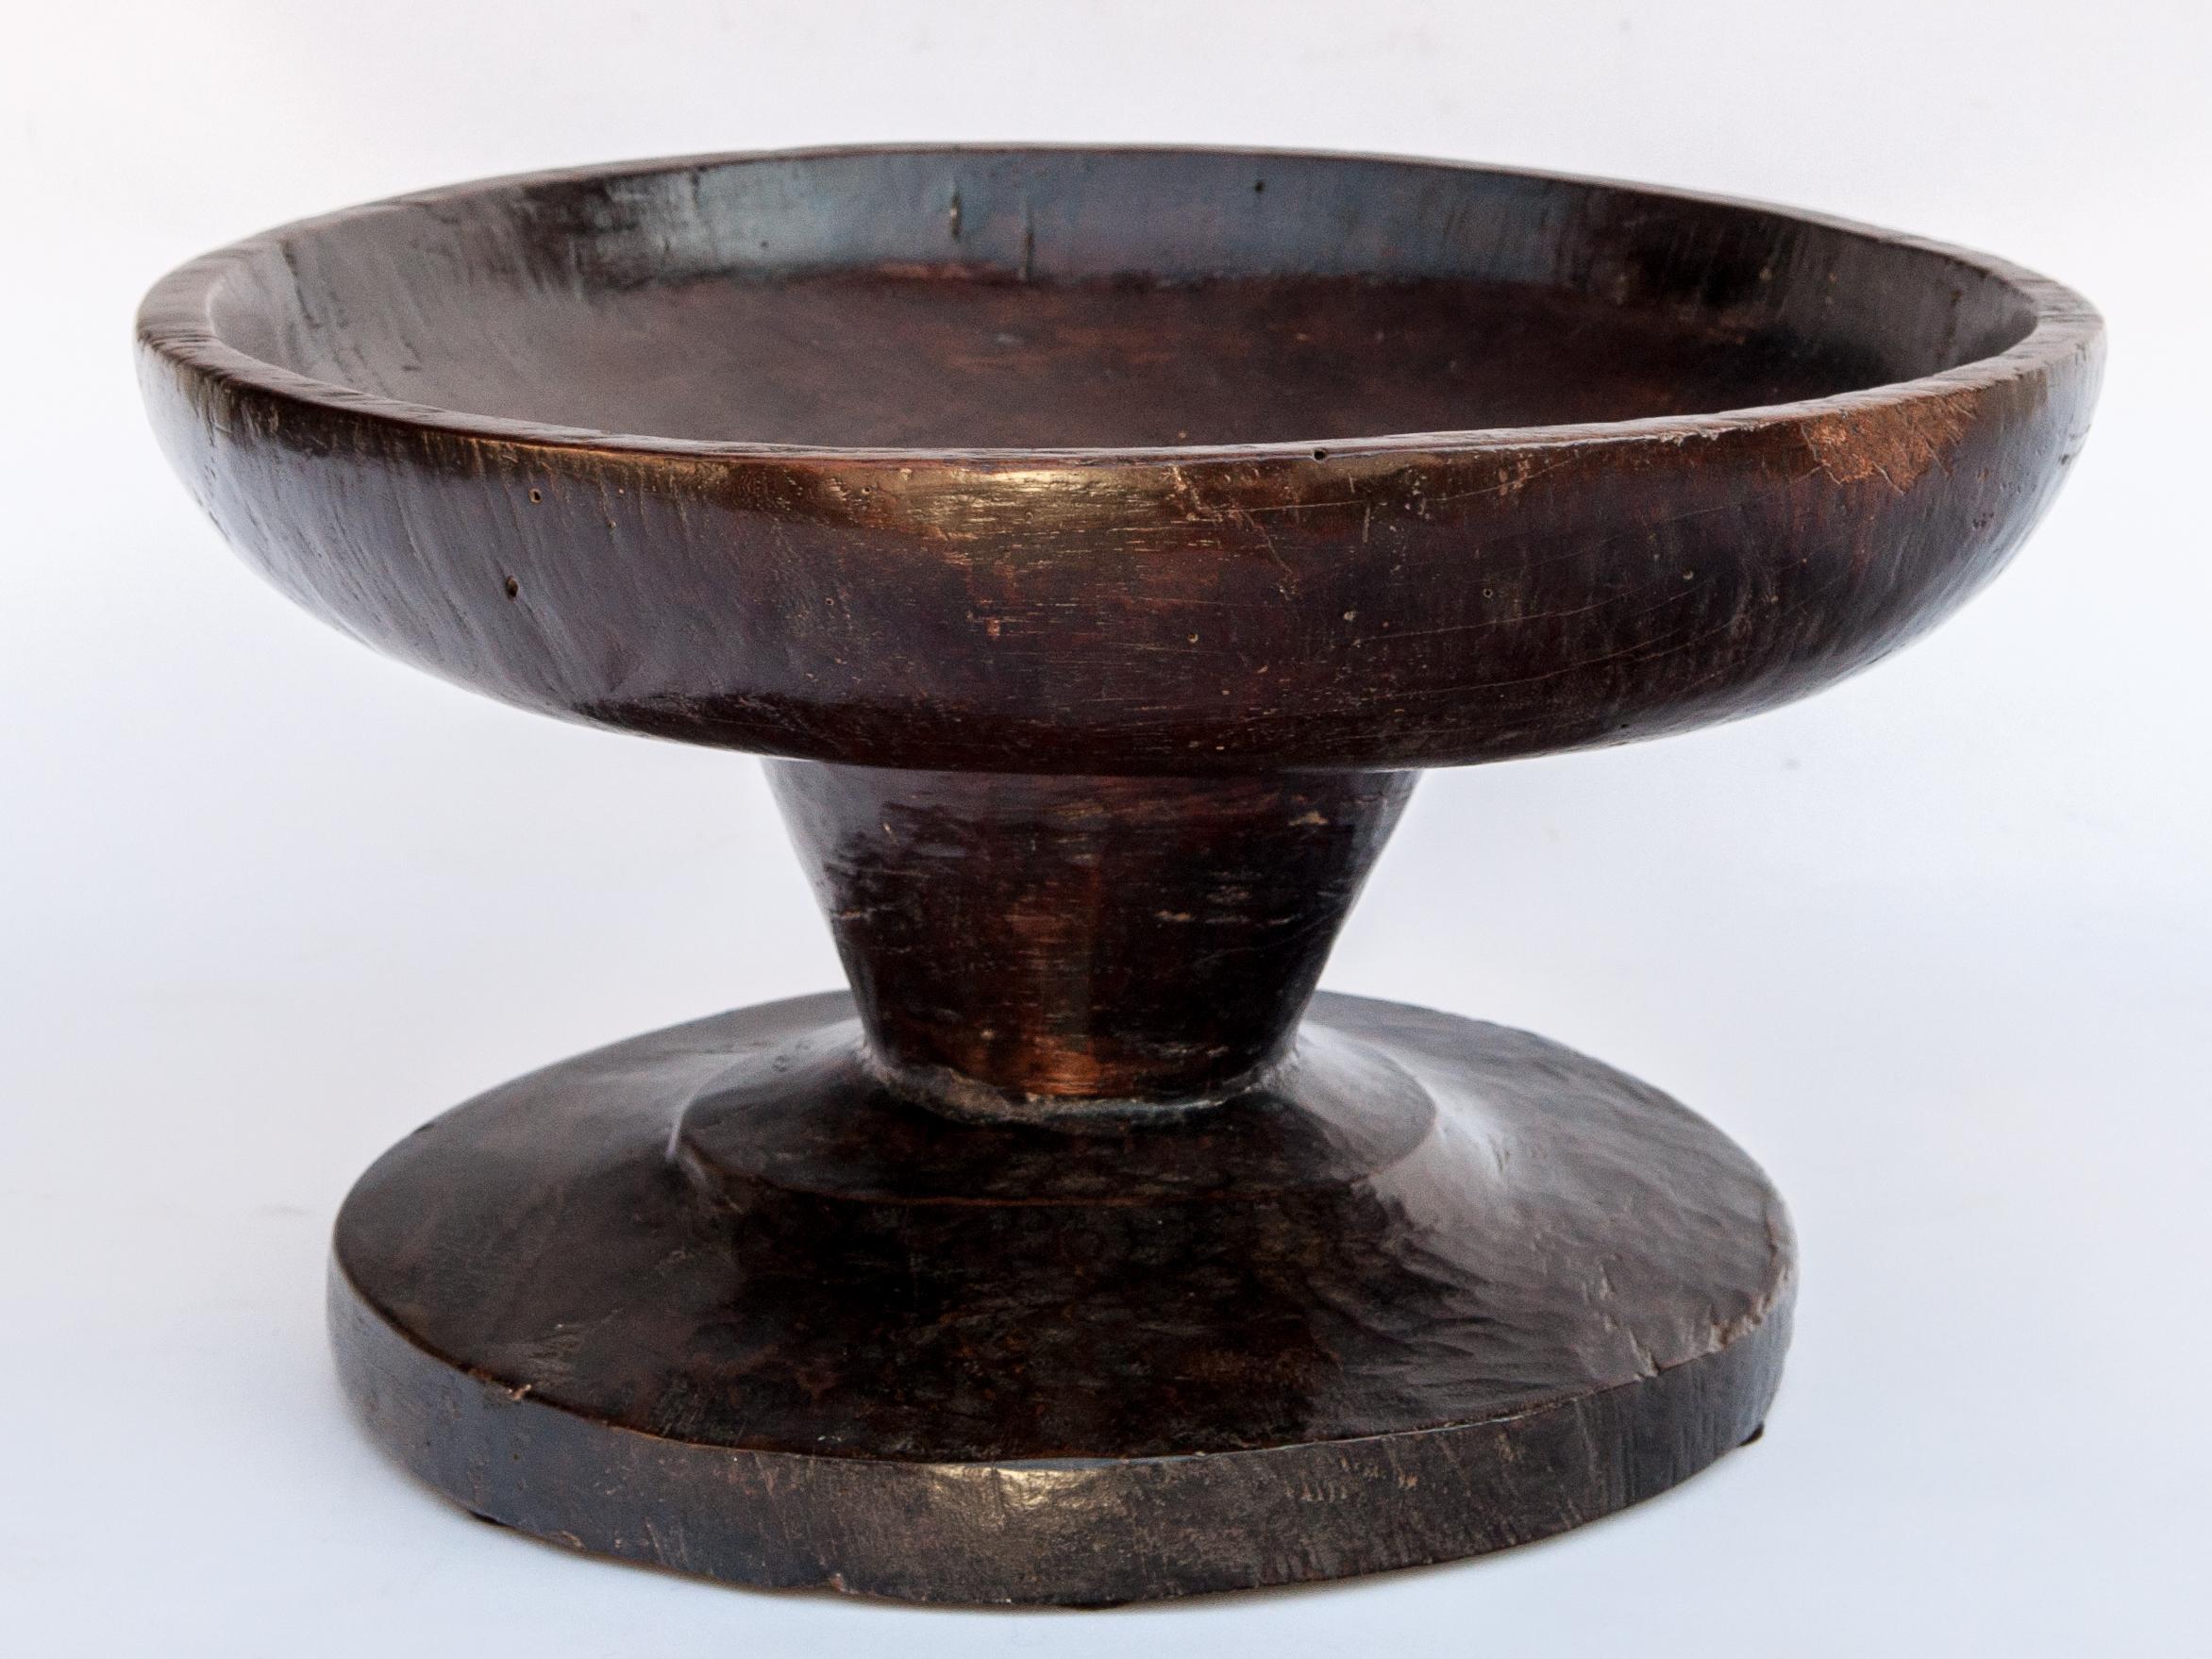 Vintage wooden bowl on stand from Sulawesi, Indonesia, mid-20th century.
This wooden bowl from the mountains of Sulawesi was fashioned by hand from local hardwood. The shape and deep cupped bowl are typical of the style from this area, but this